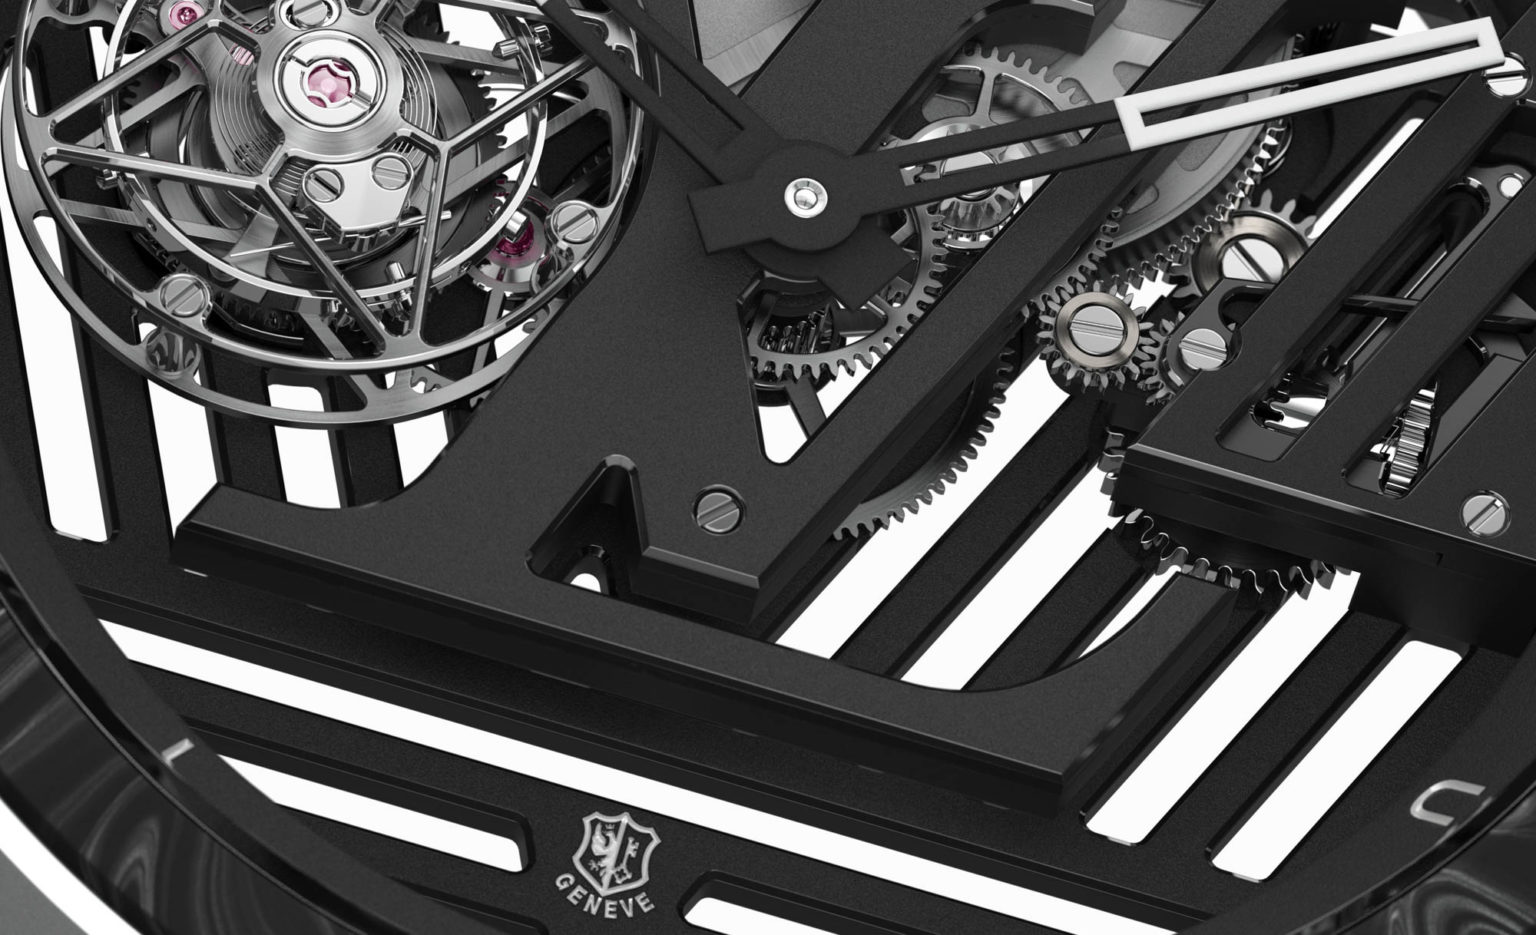 CPP-LUXURY.COM on X: Louis Vuitton launches €280,000 Tambour Curve Flying  Tourbillon watch (2020 novelty)  #LouisVuitton #LV # Tambour #TambourCurve #Tourbillon #FlyingTourbillon #watch #luxury  #luxurywatch @LVMH @LouisVuitton